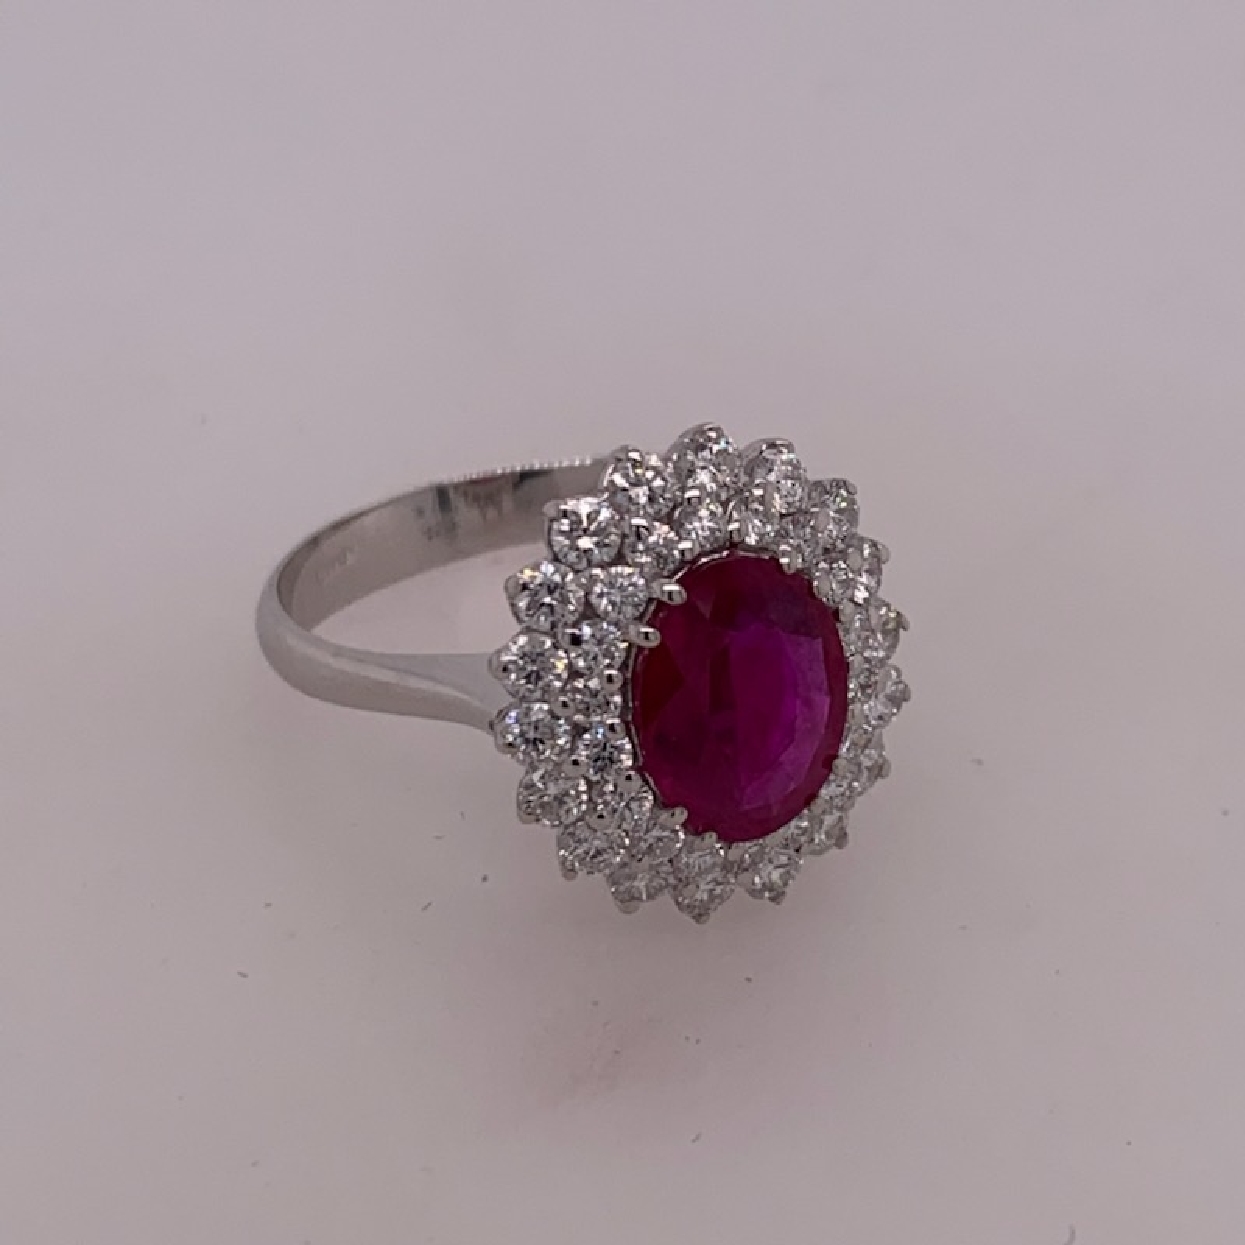 18k White Gold Oval Natural Step Cut Burma Ruby with Double Diamond Halo Size 7

Comes with Copy of GIA Cert